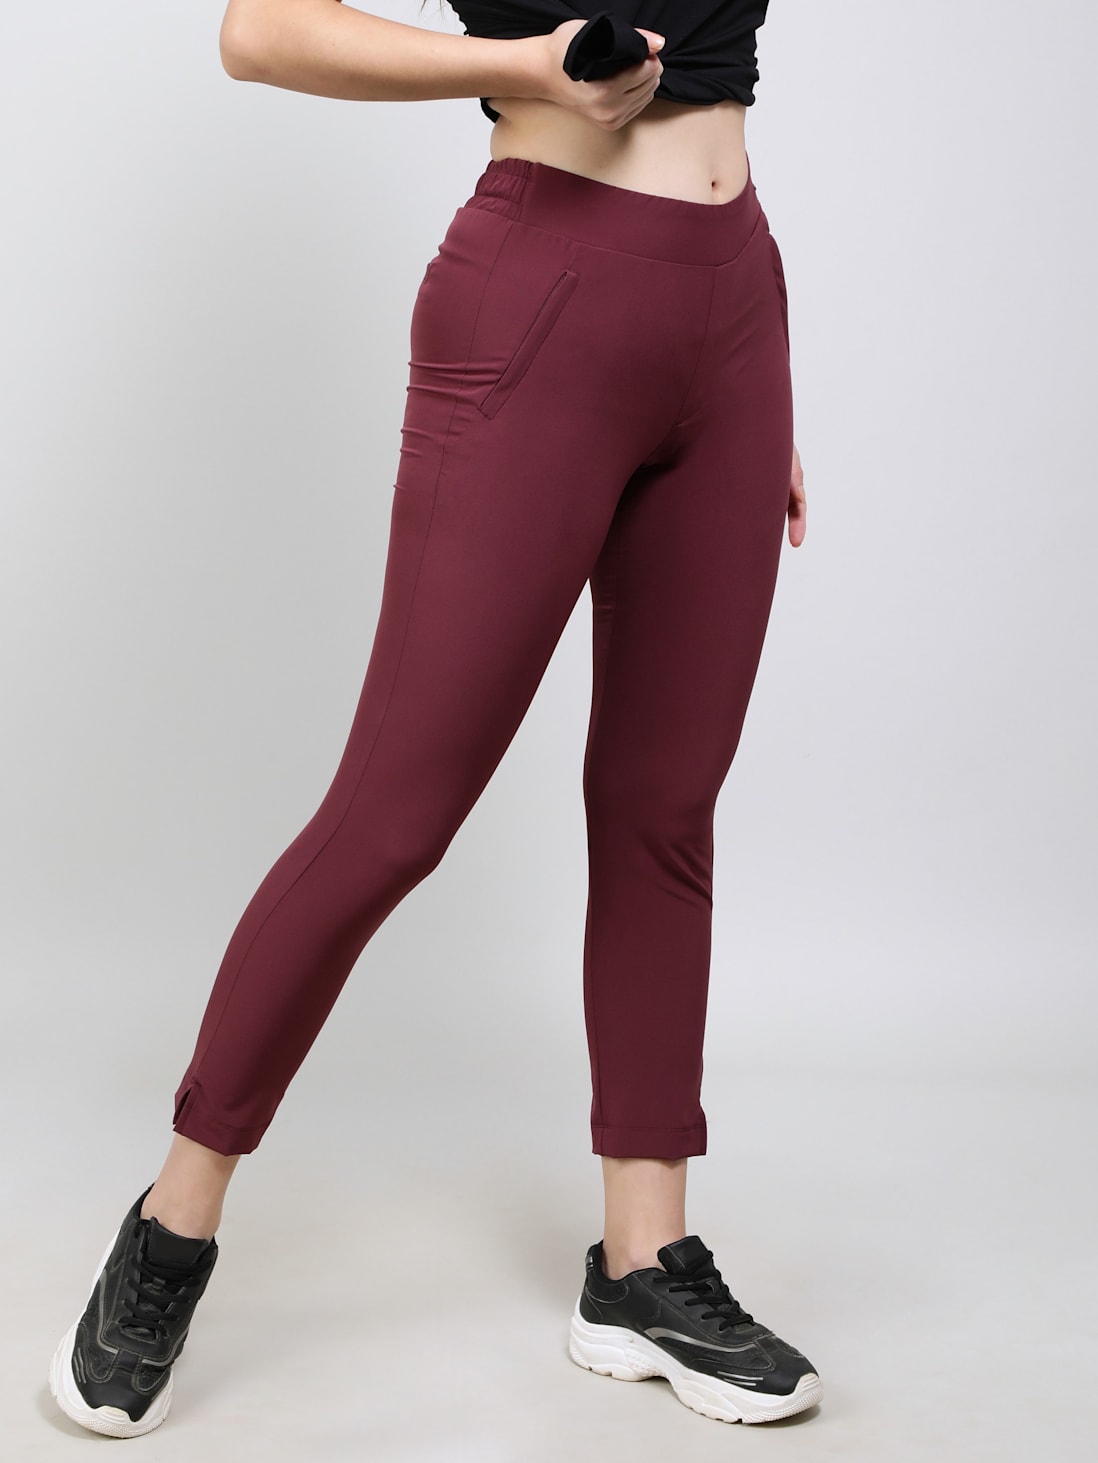 Free People In My Feelings Crop Boot Trousers in Fig Jam | Free People  Clothing annscottage.com